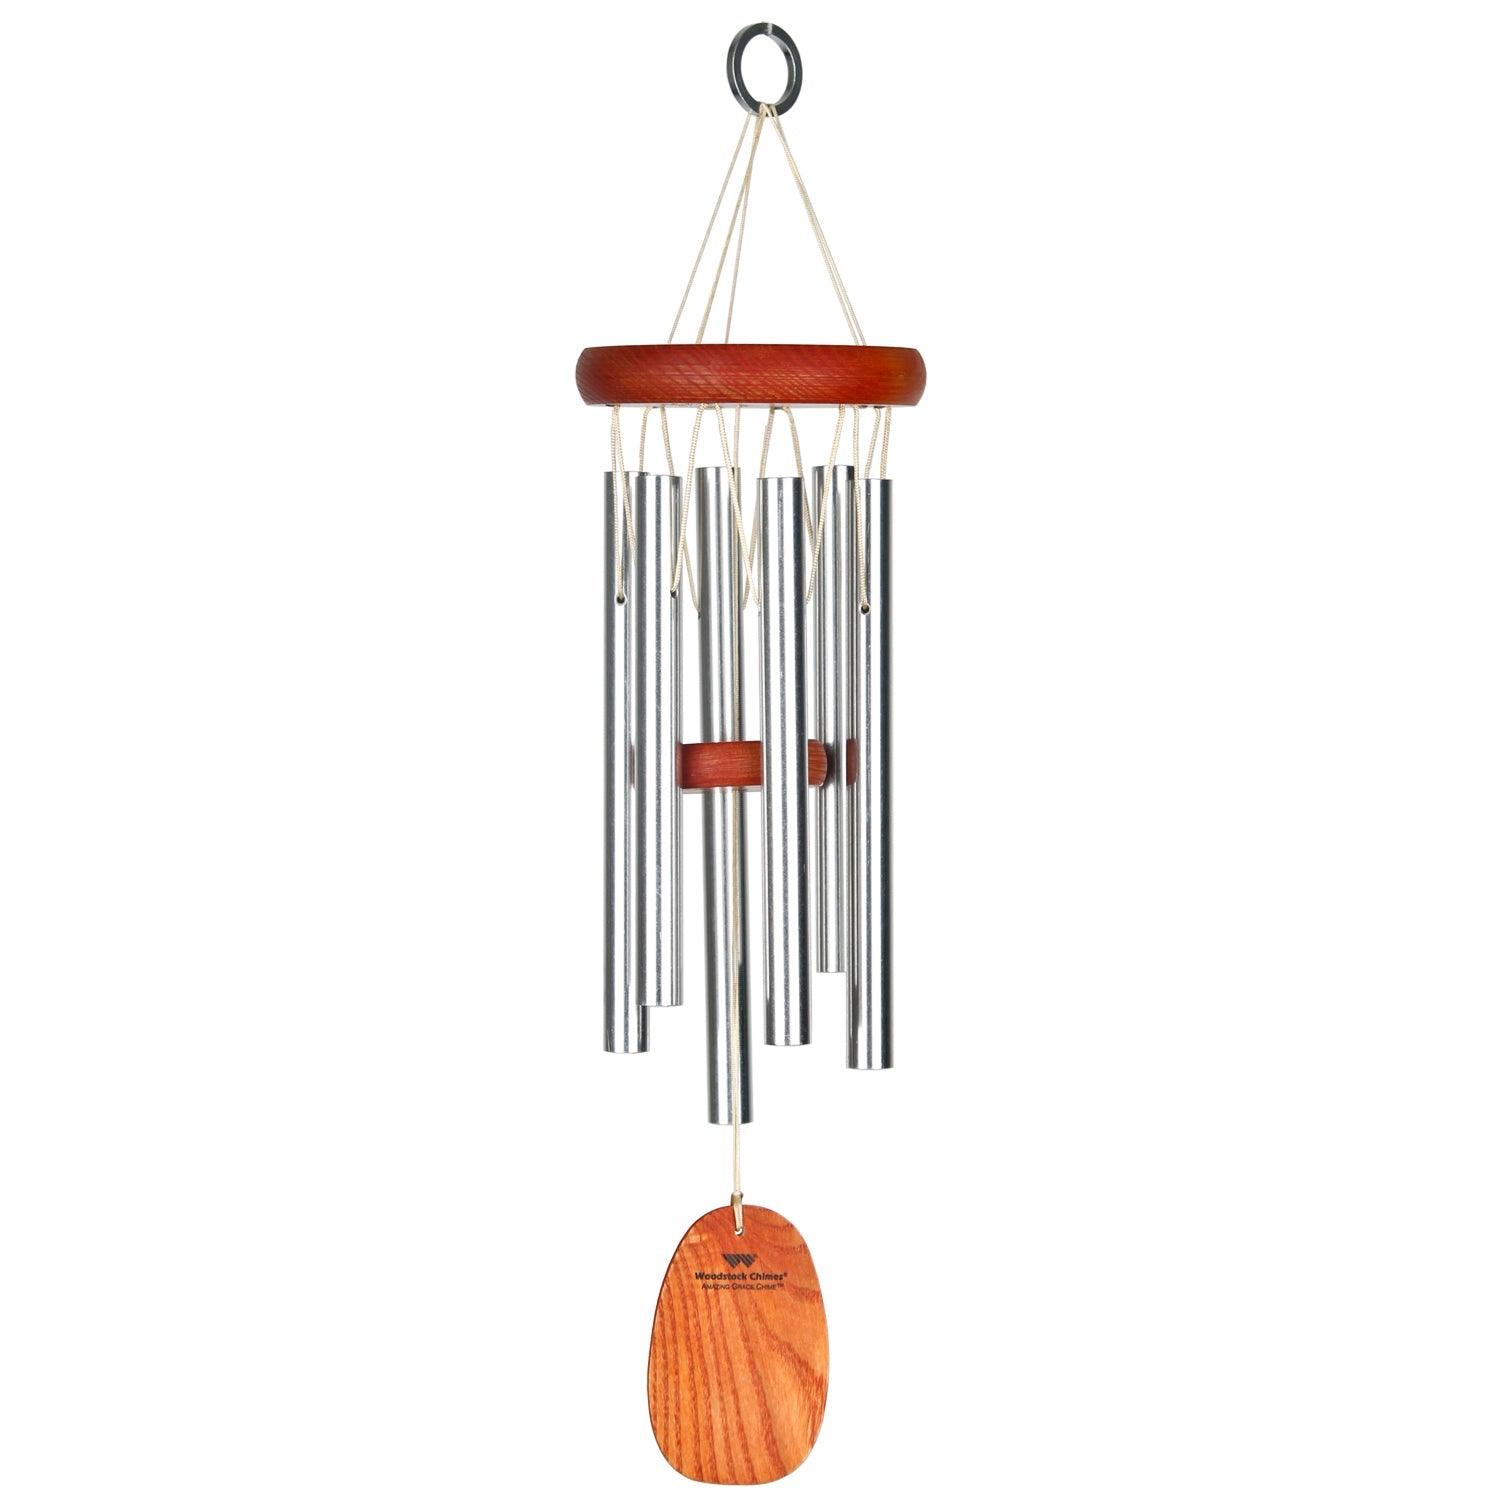 Bring harmony and comfort into your home with this beautiful and durable wind chime. Made with cherry finish ash wood and six silver aluminum tubes. Measures 16 inches in length and 4 inches in diameter.